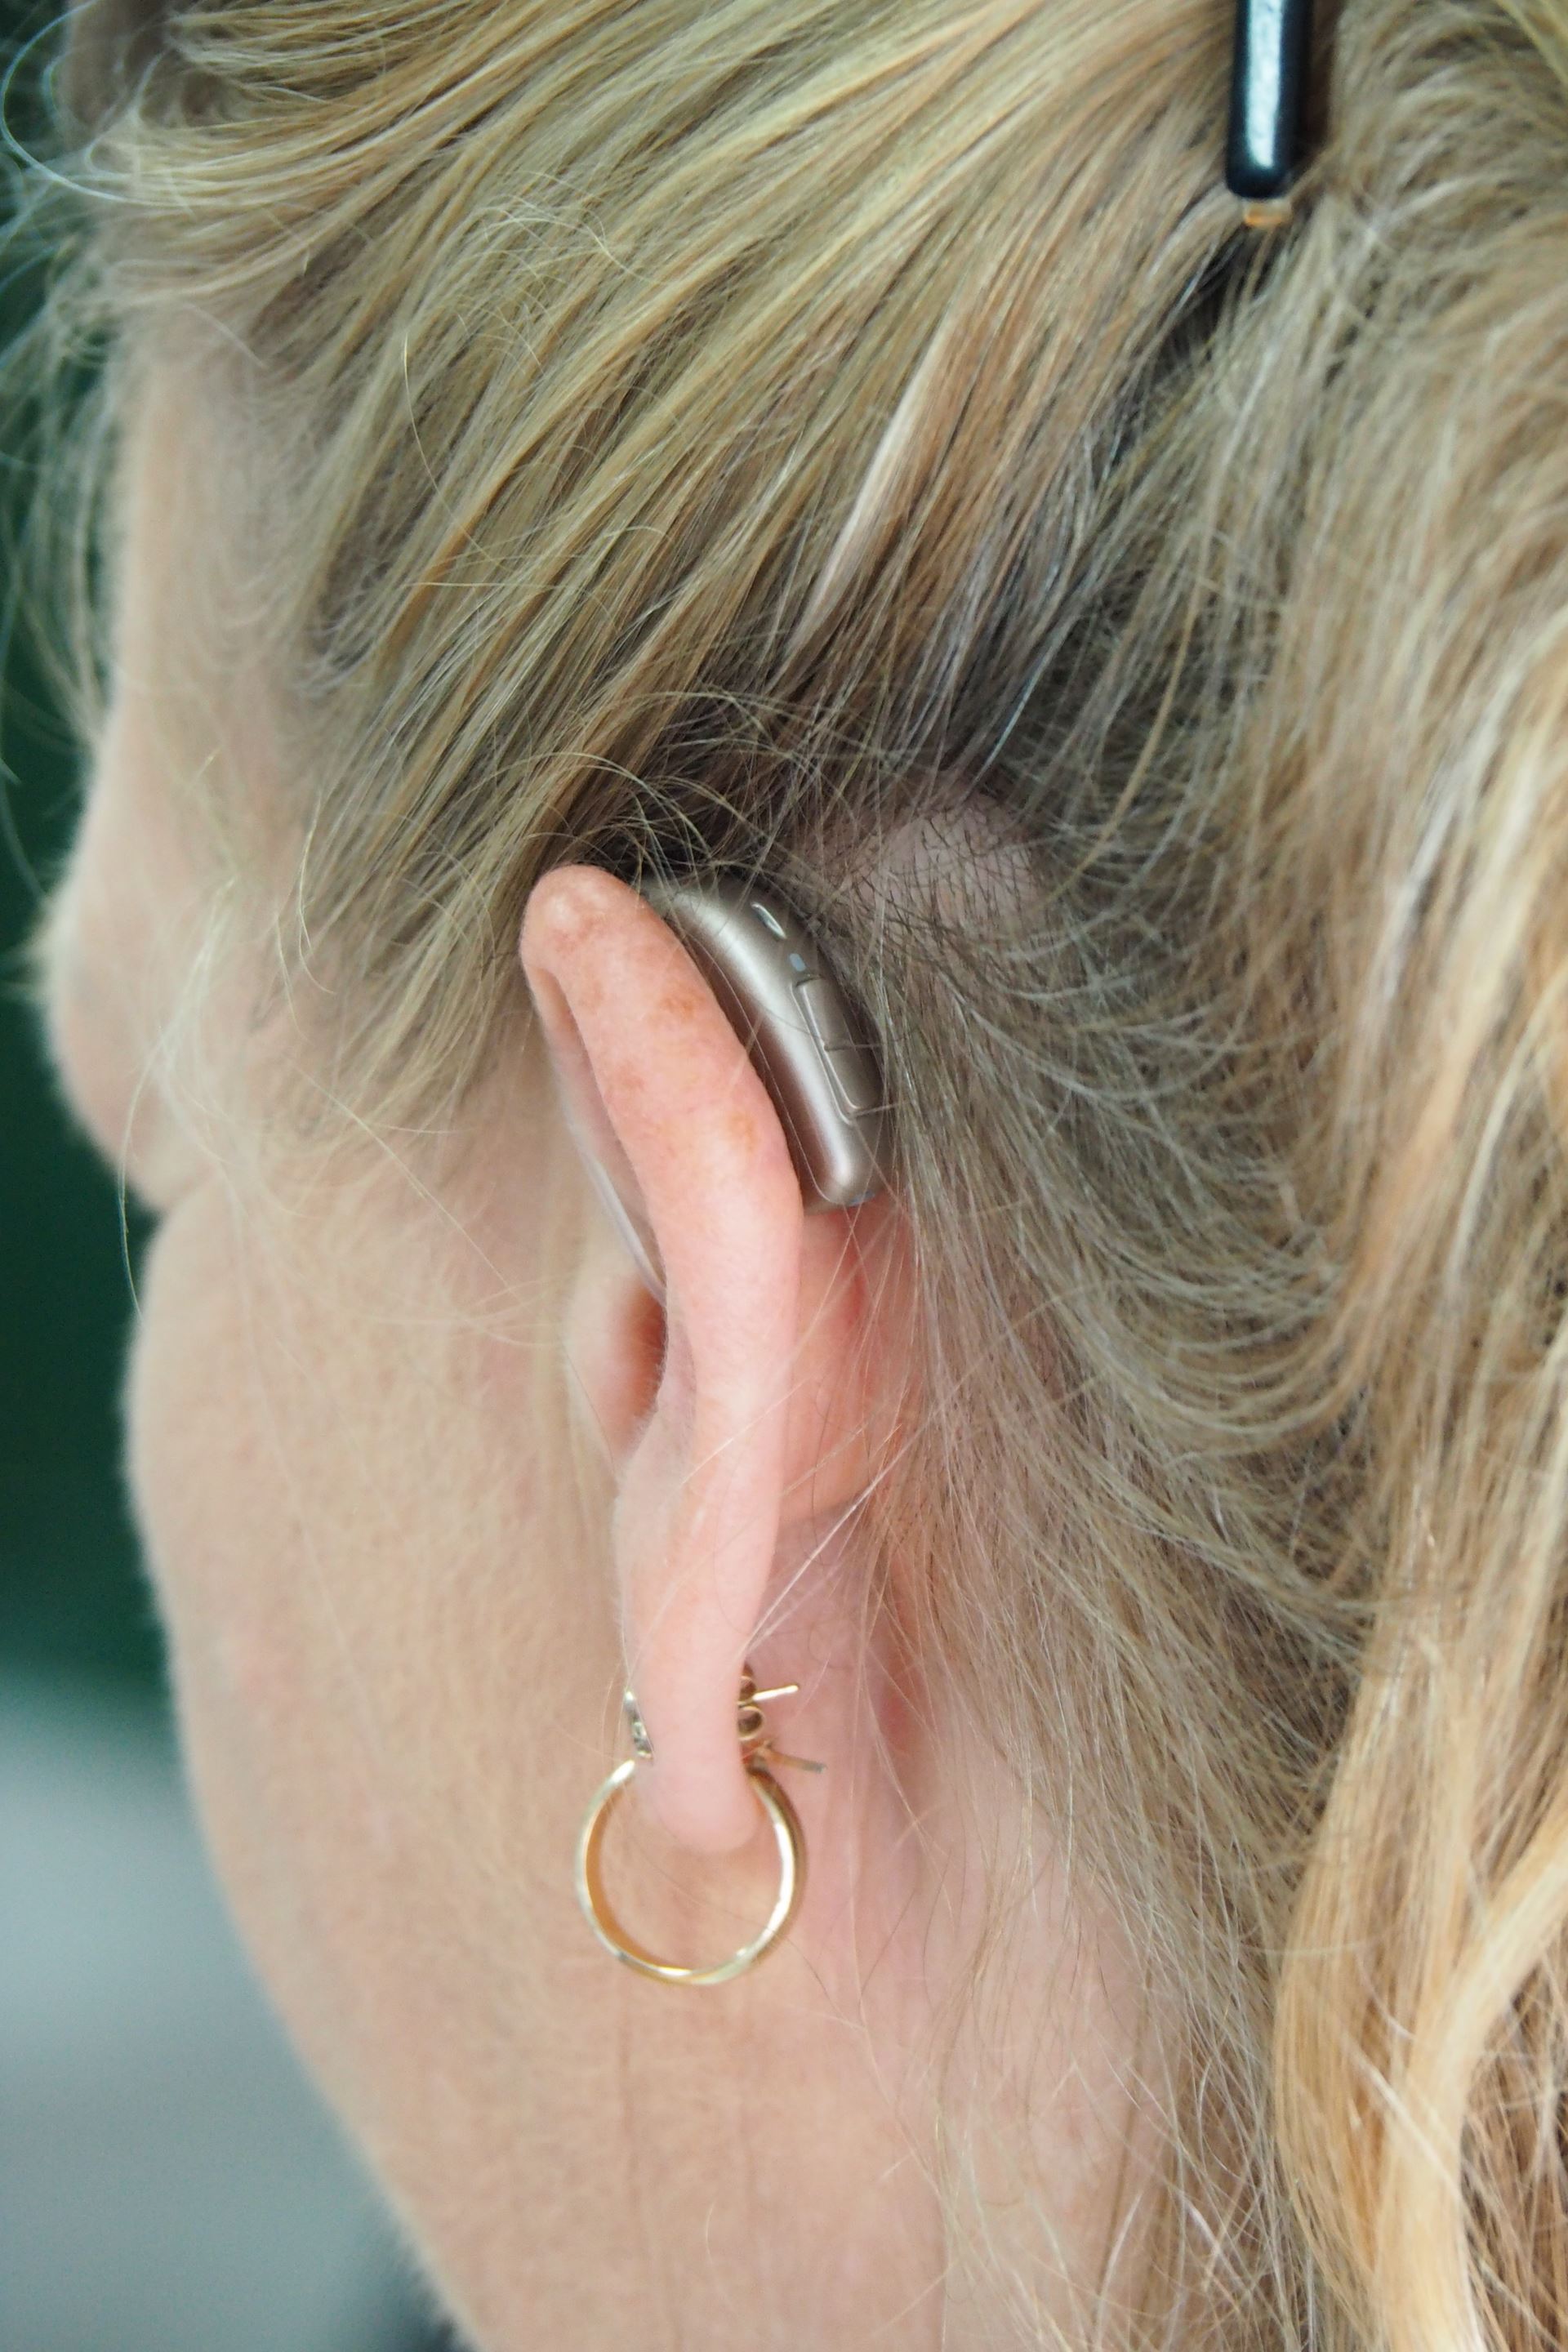 A woman with blonde hair with a hearing aid in the left ear